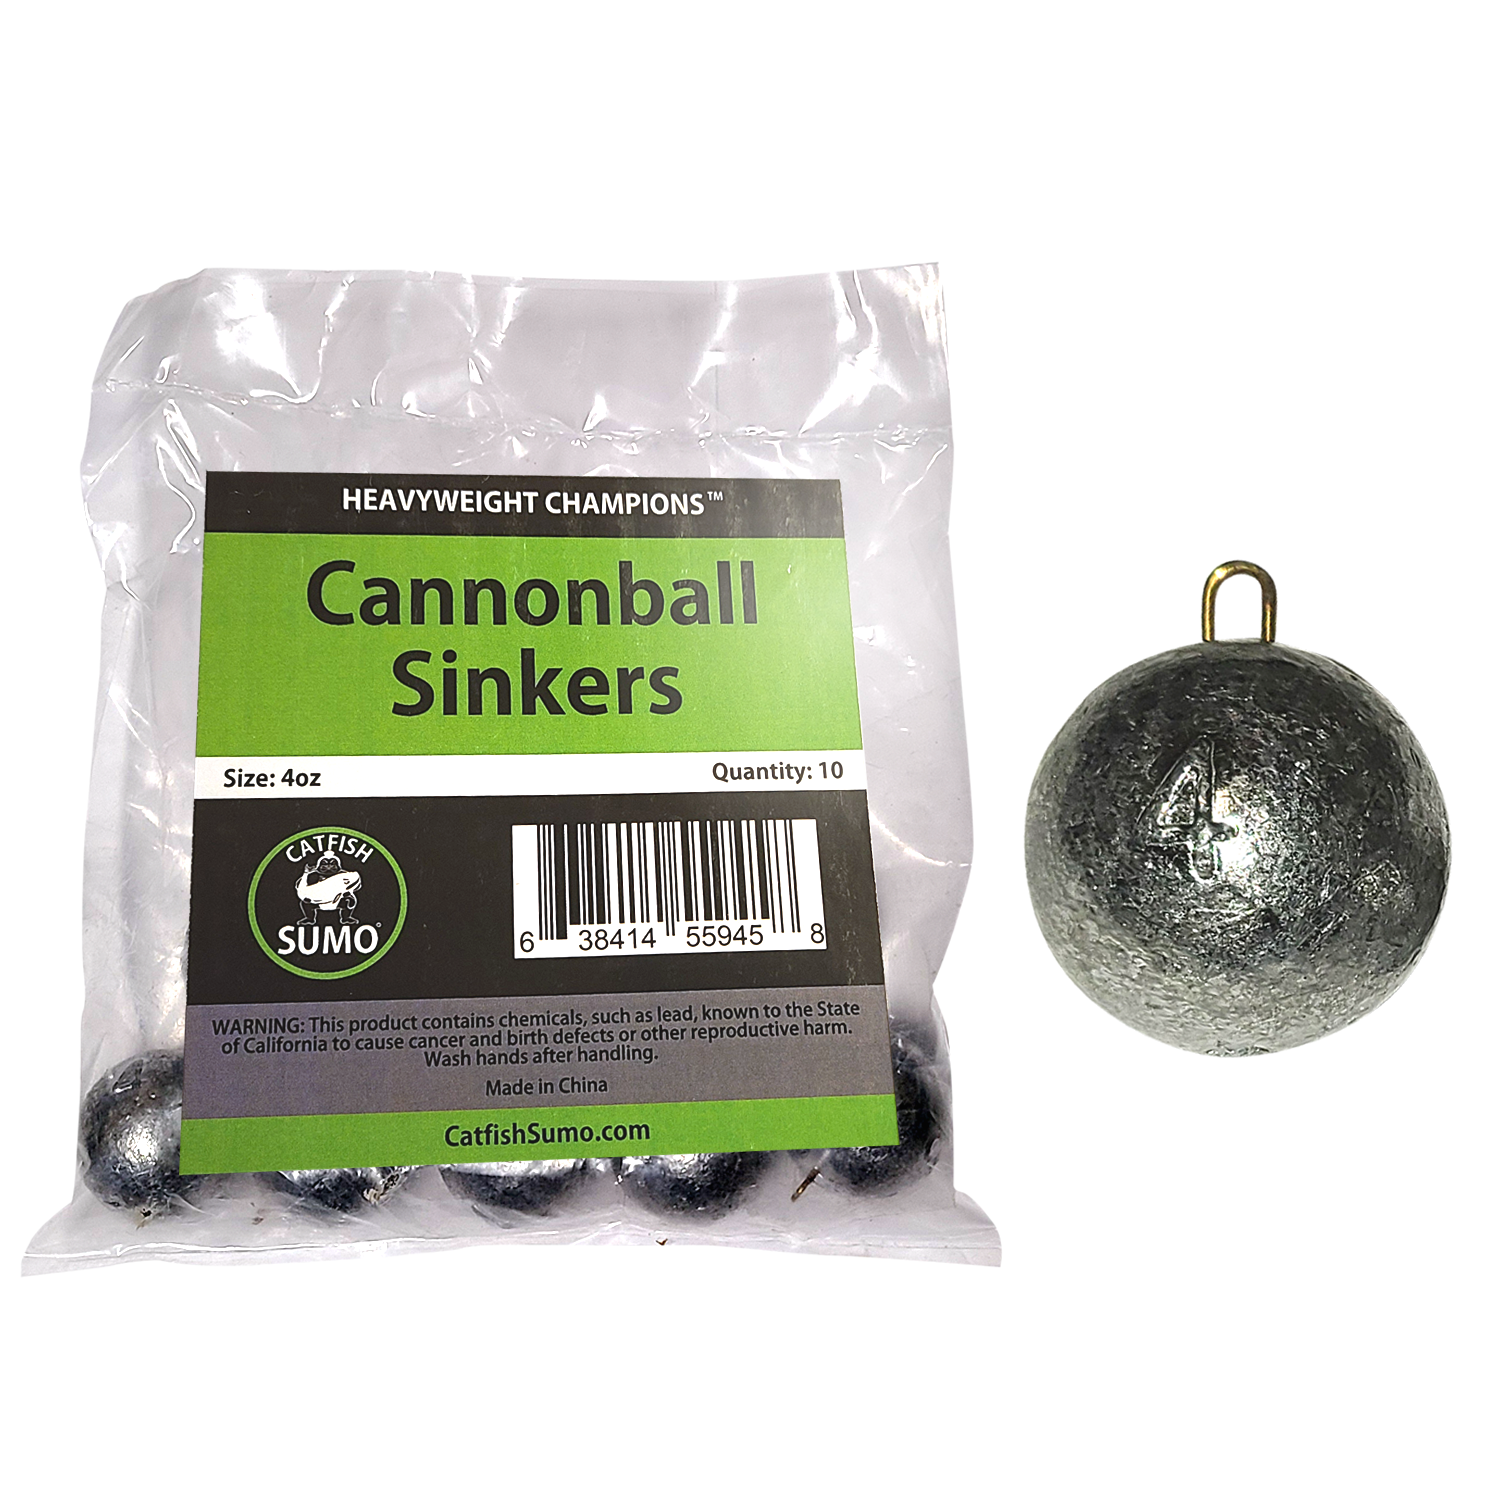 Cannonball Sinkers for Catfishing